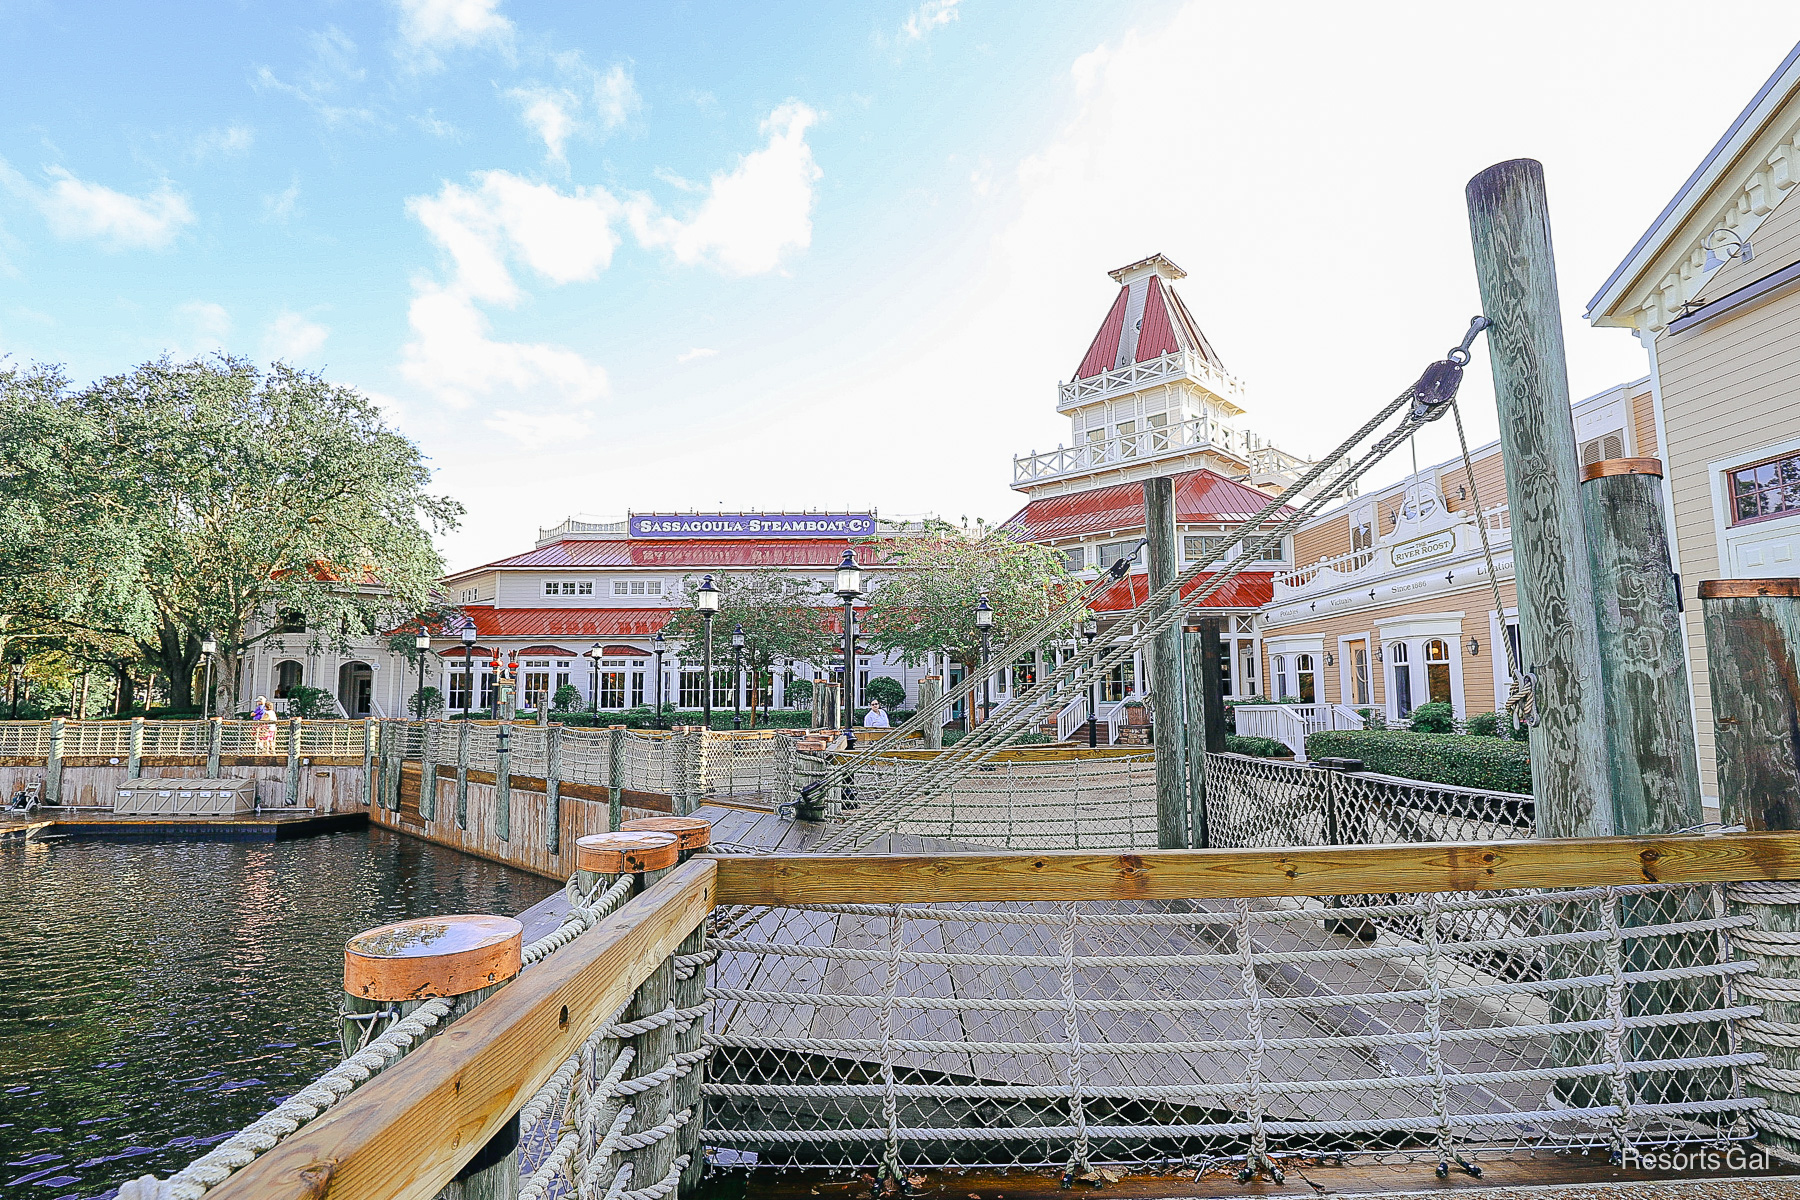 A Photo Perspective of a Serene Port Orleans Riverside Resort